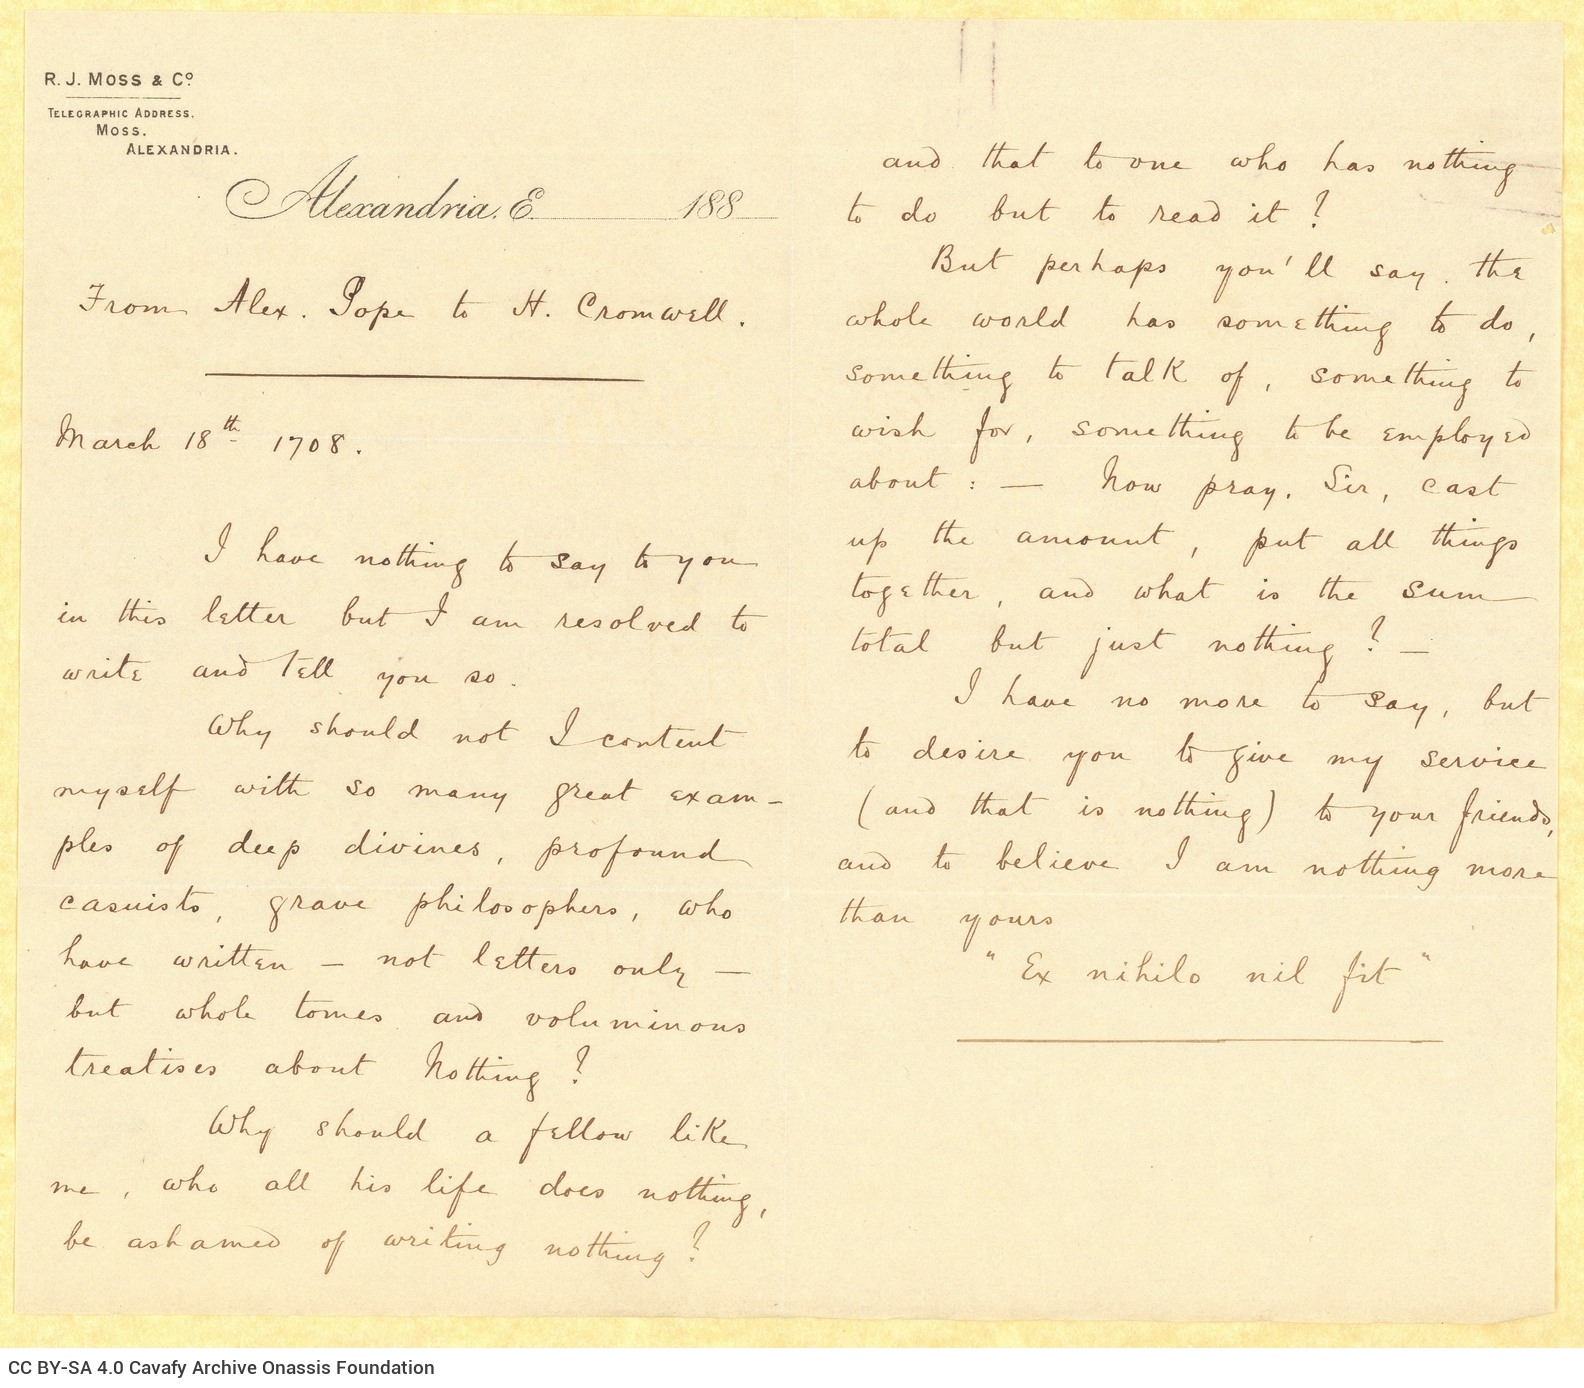 Handwritten letter by John Cavafy to C. P. Cavafy on the first and third pages of two double sheet notepapers and on the rect